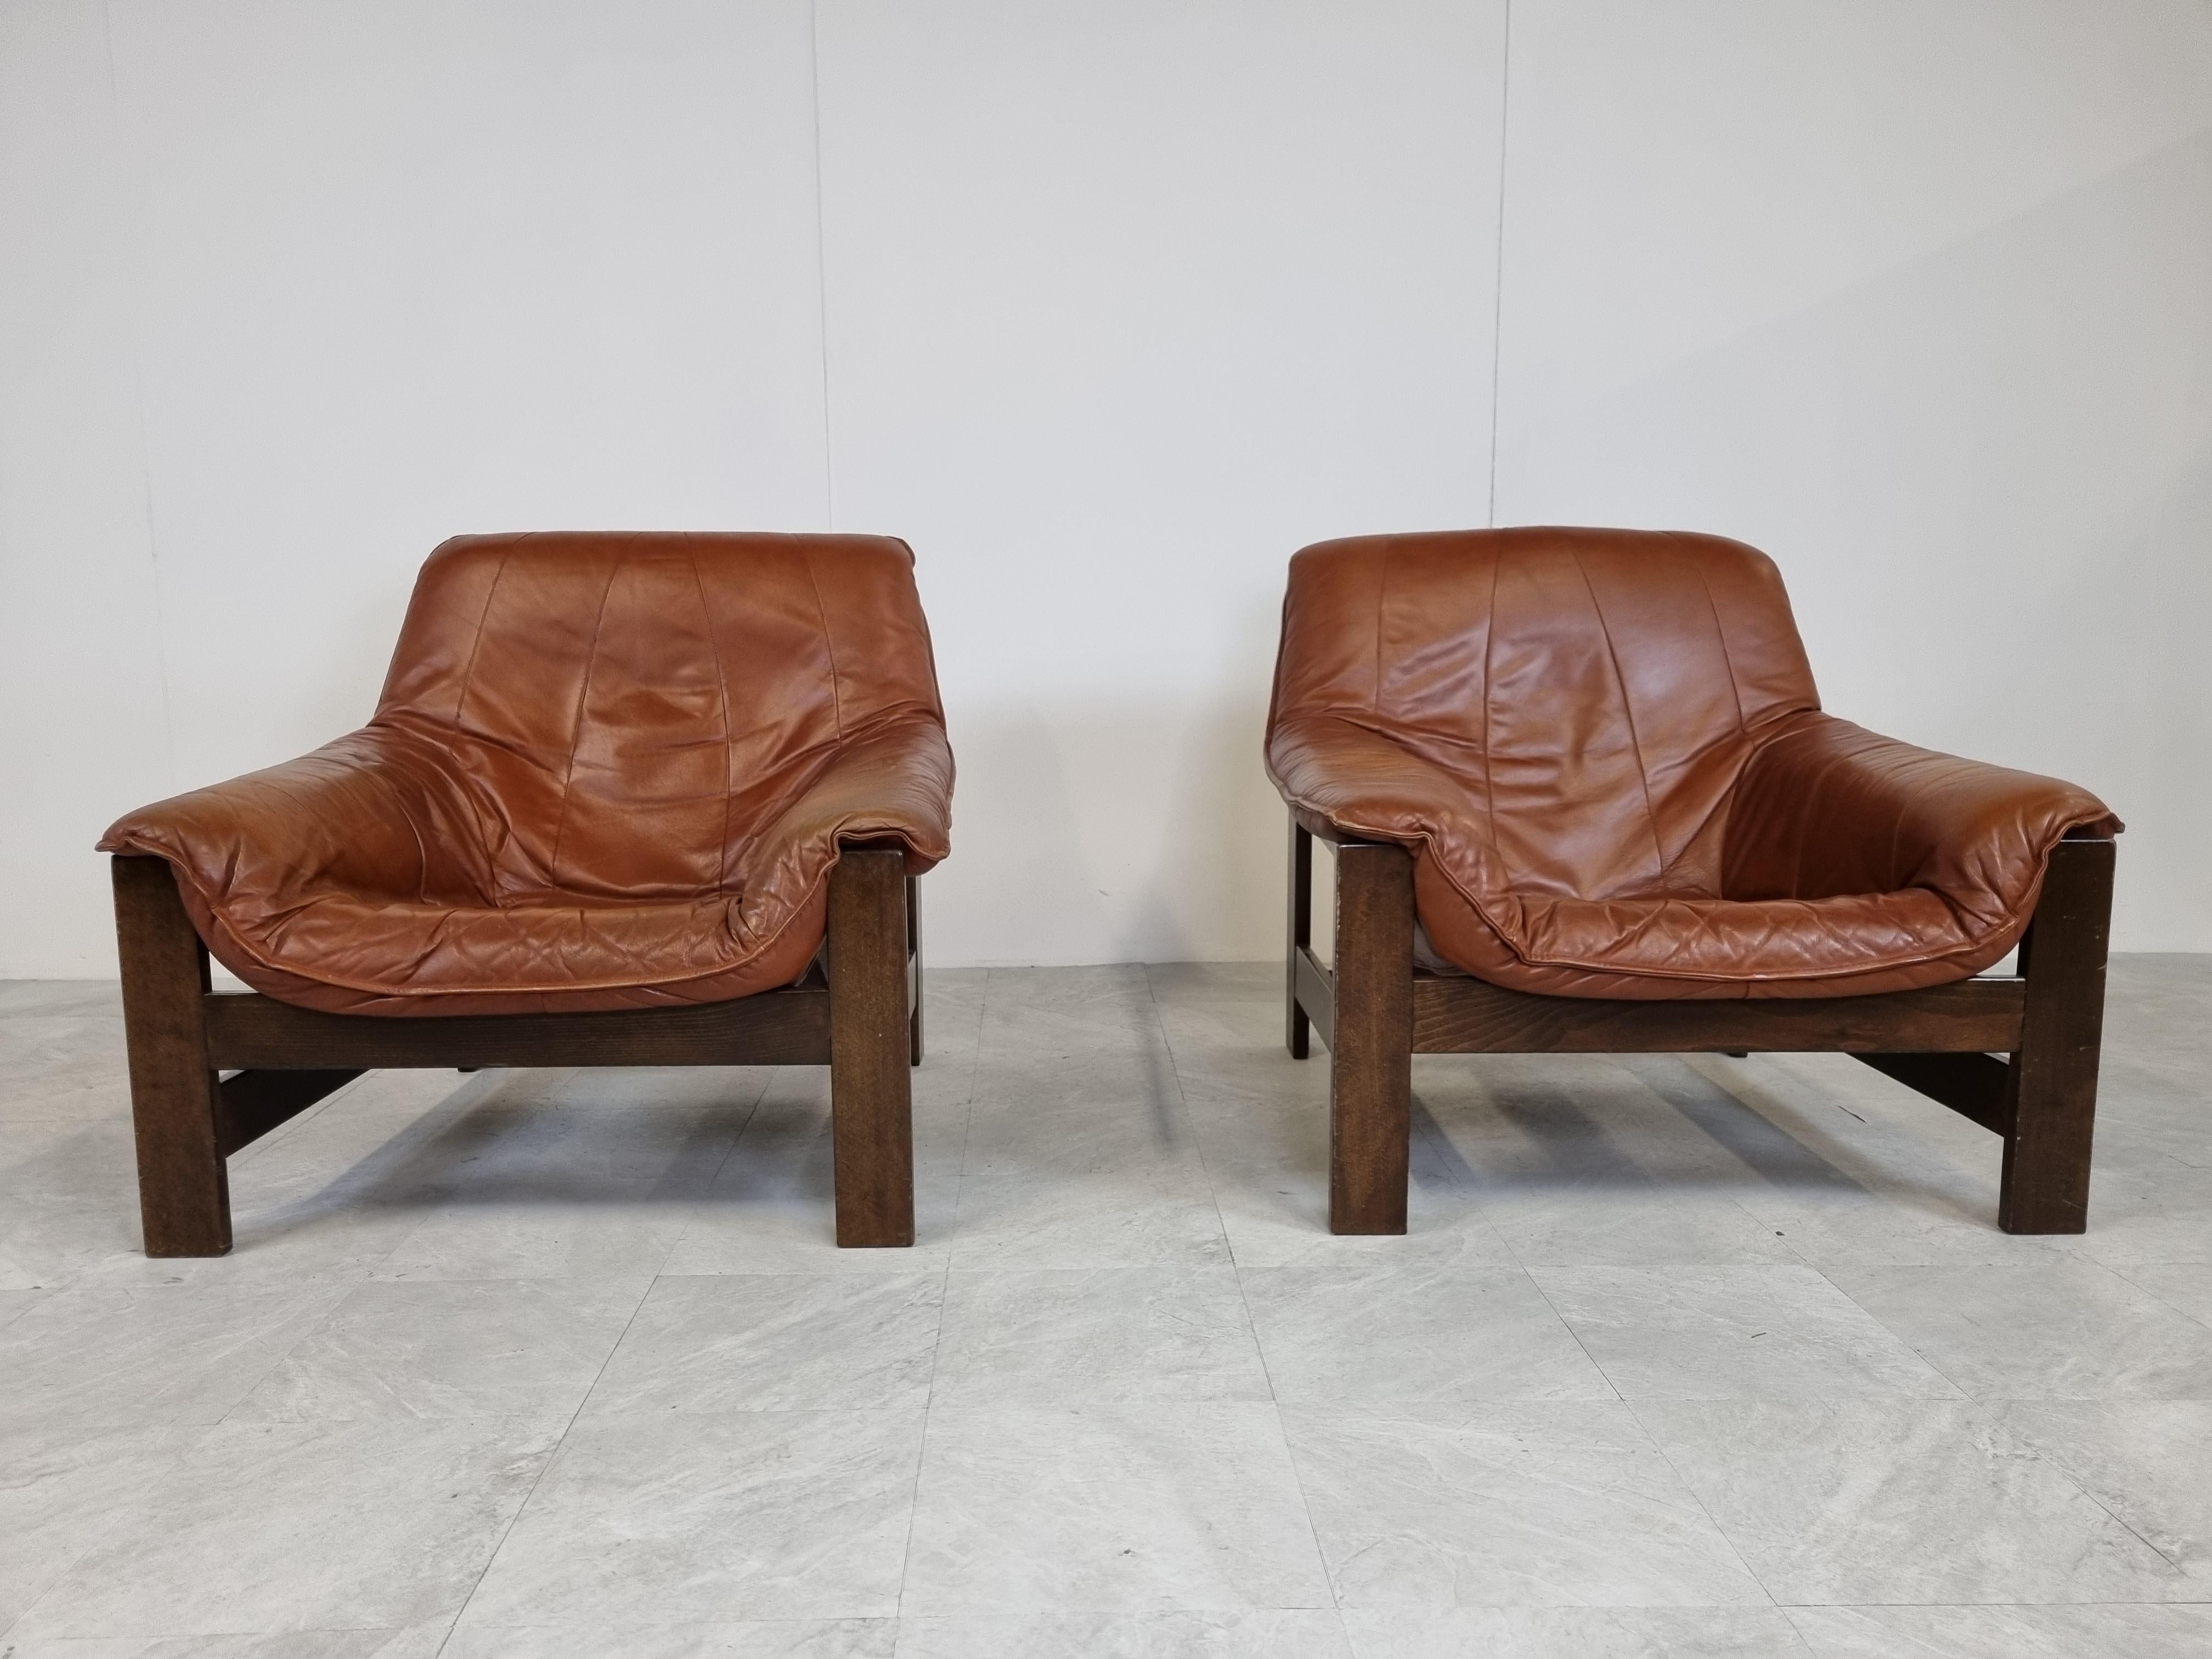 Pair of brown leather lounge chairs with solid oak frames.

Good condition with normal wear.

1970s - Germany

Dimensions
Height: 82cm/32.28